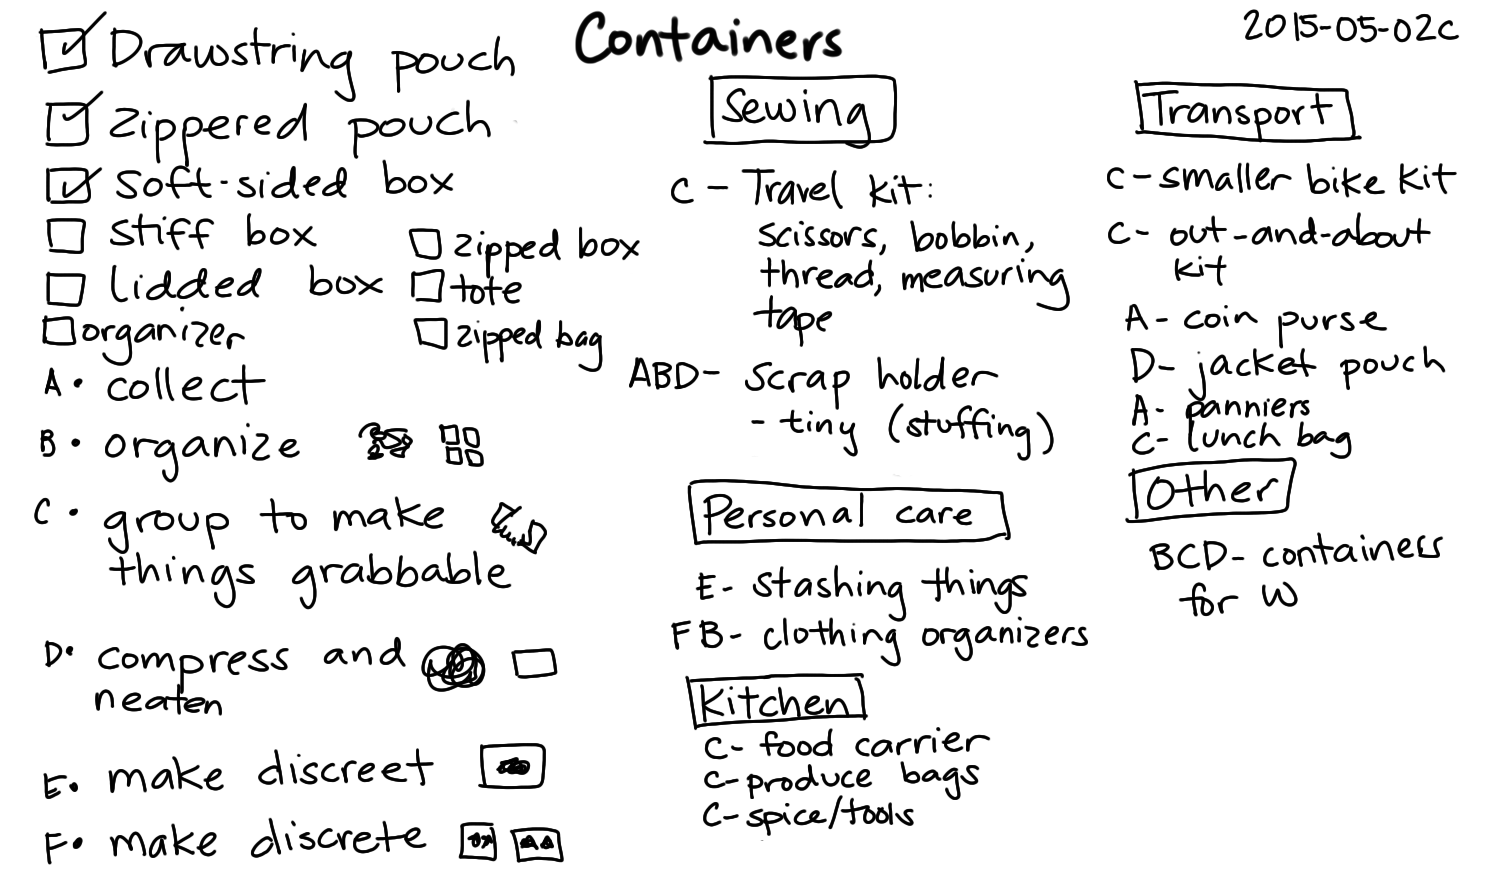 2015-05-02c Containers -- index card #sewing.png